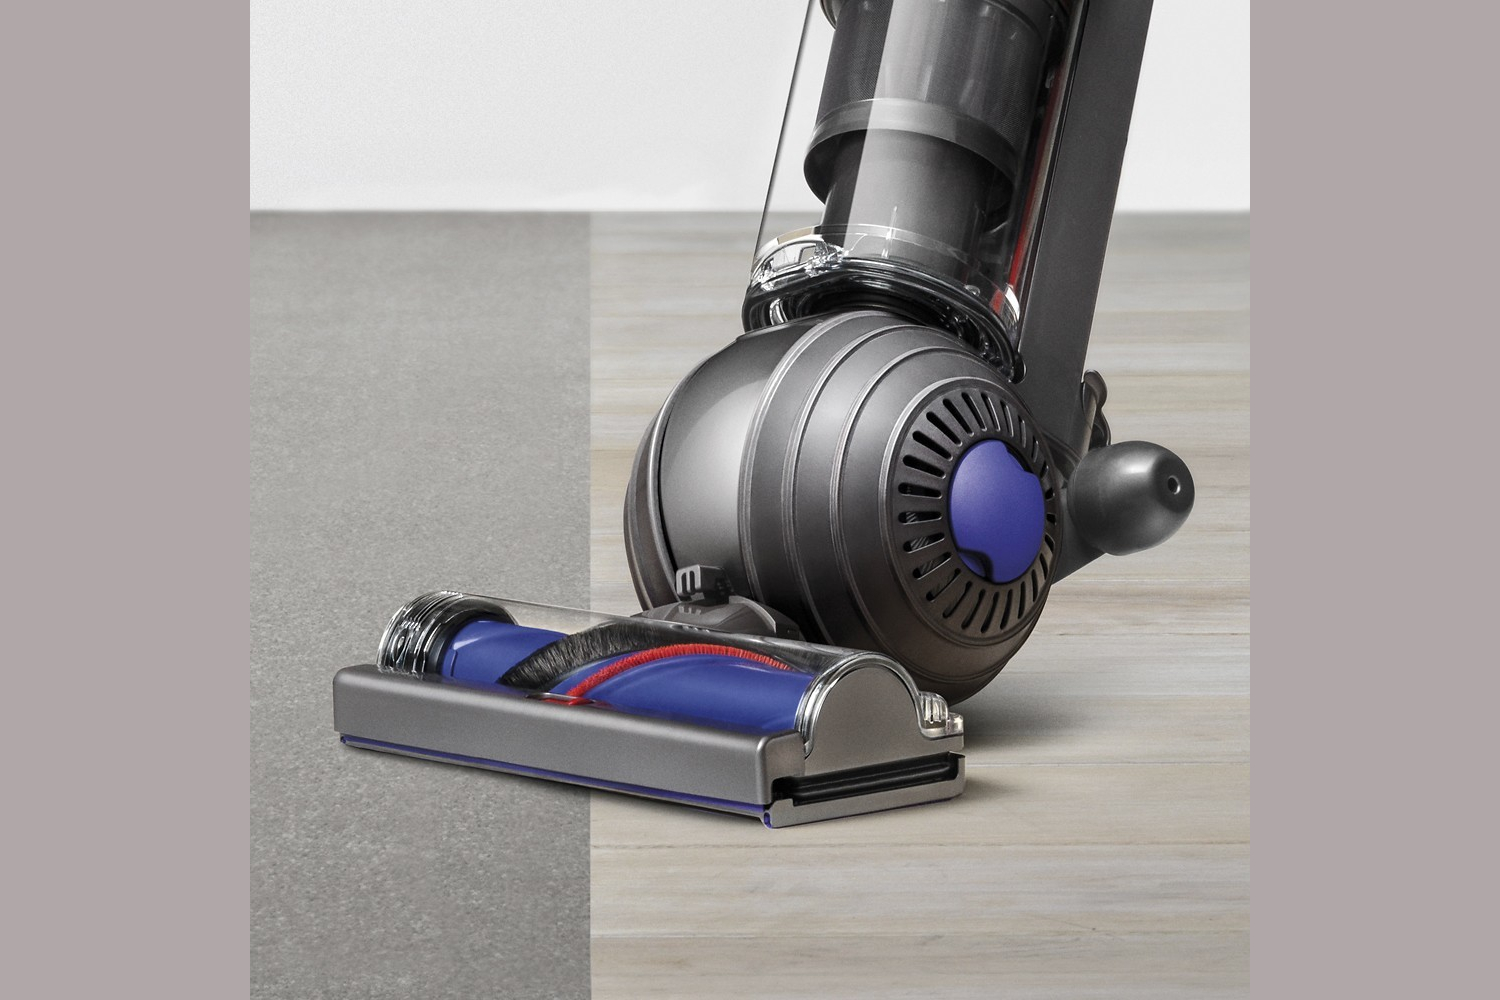 walmart slashes prices on dyson ball multi floor upright vacuums post prime day small vacuum 3